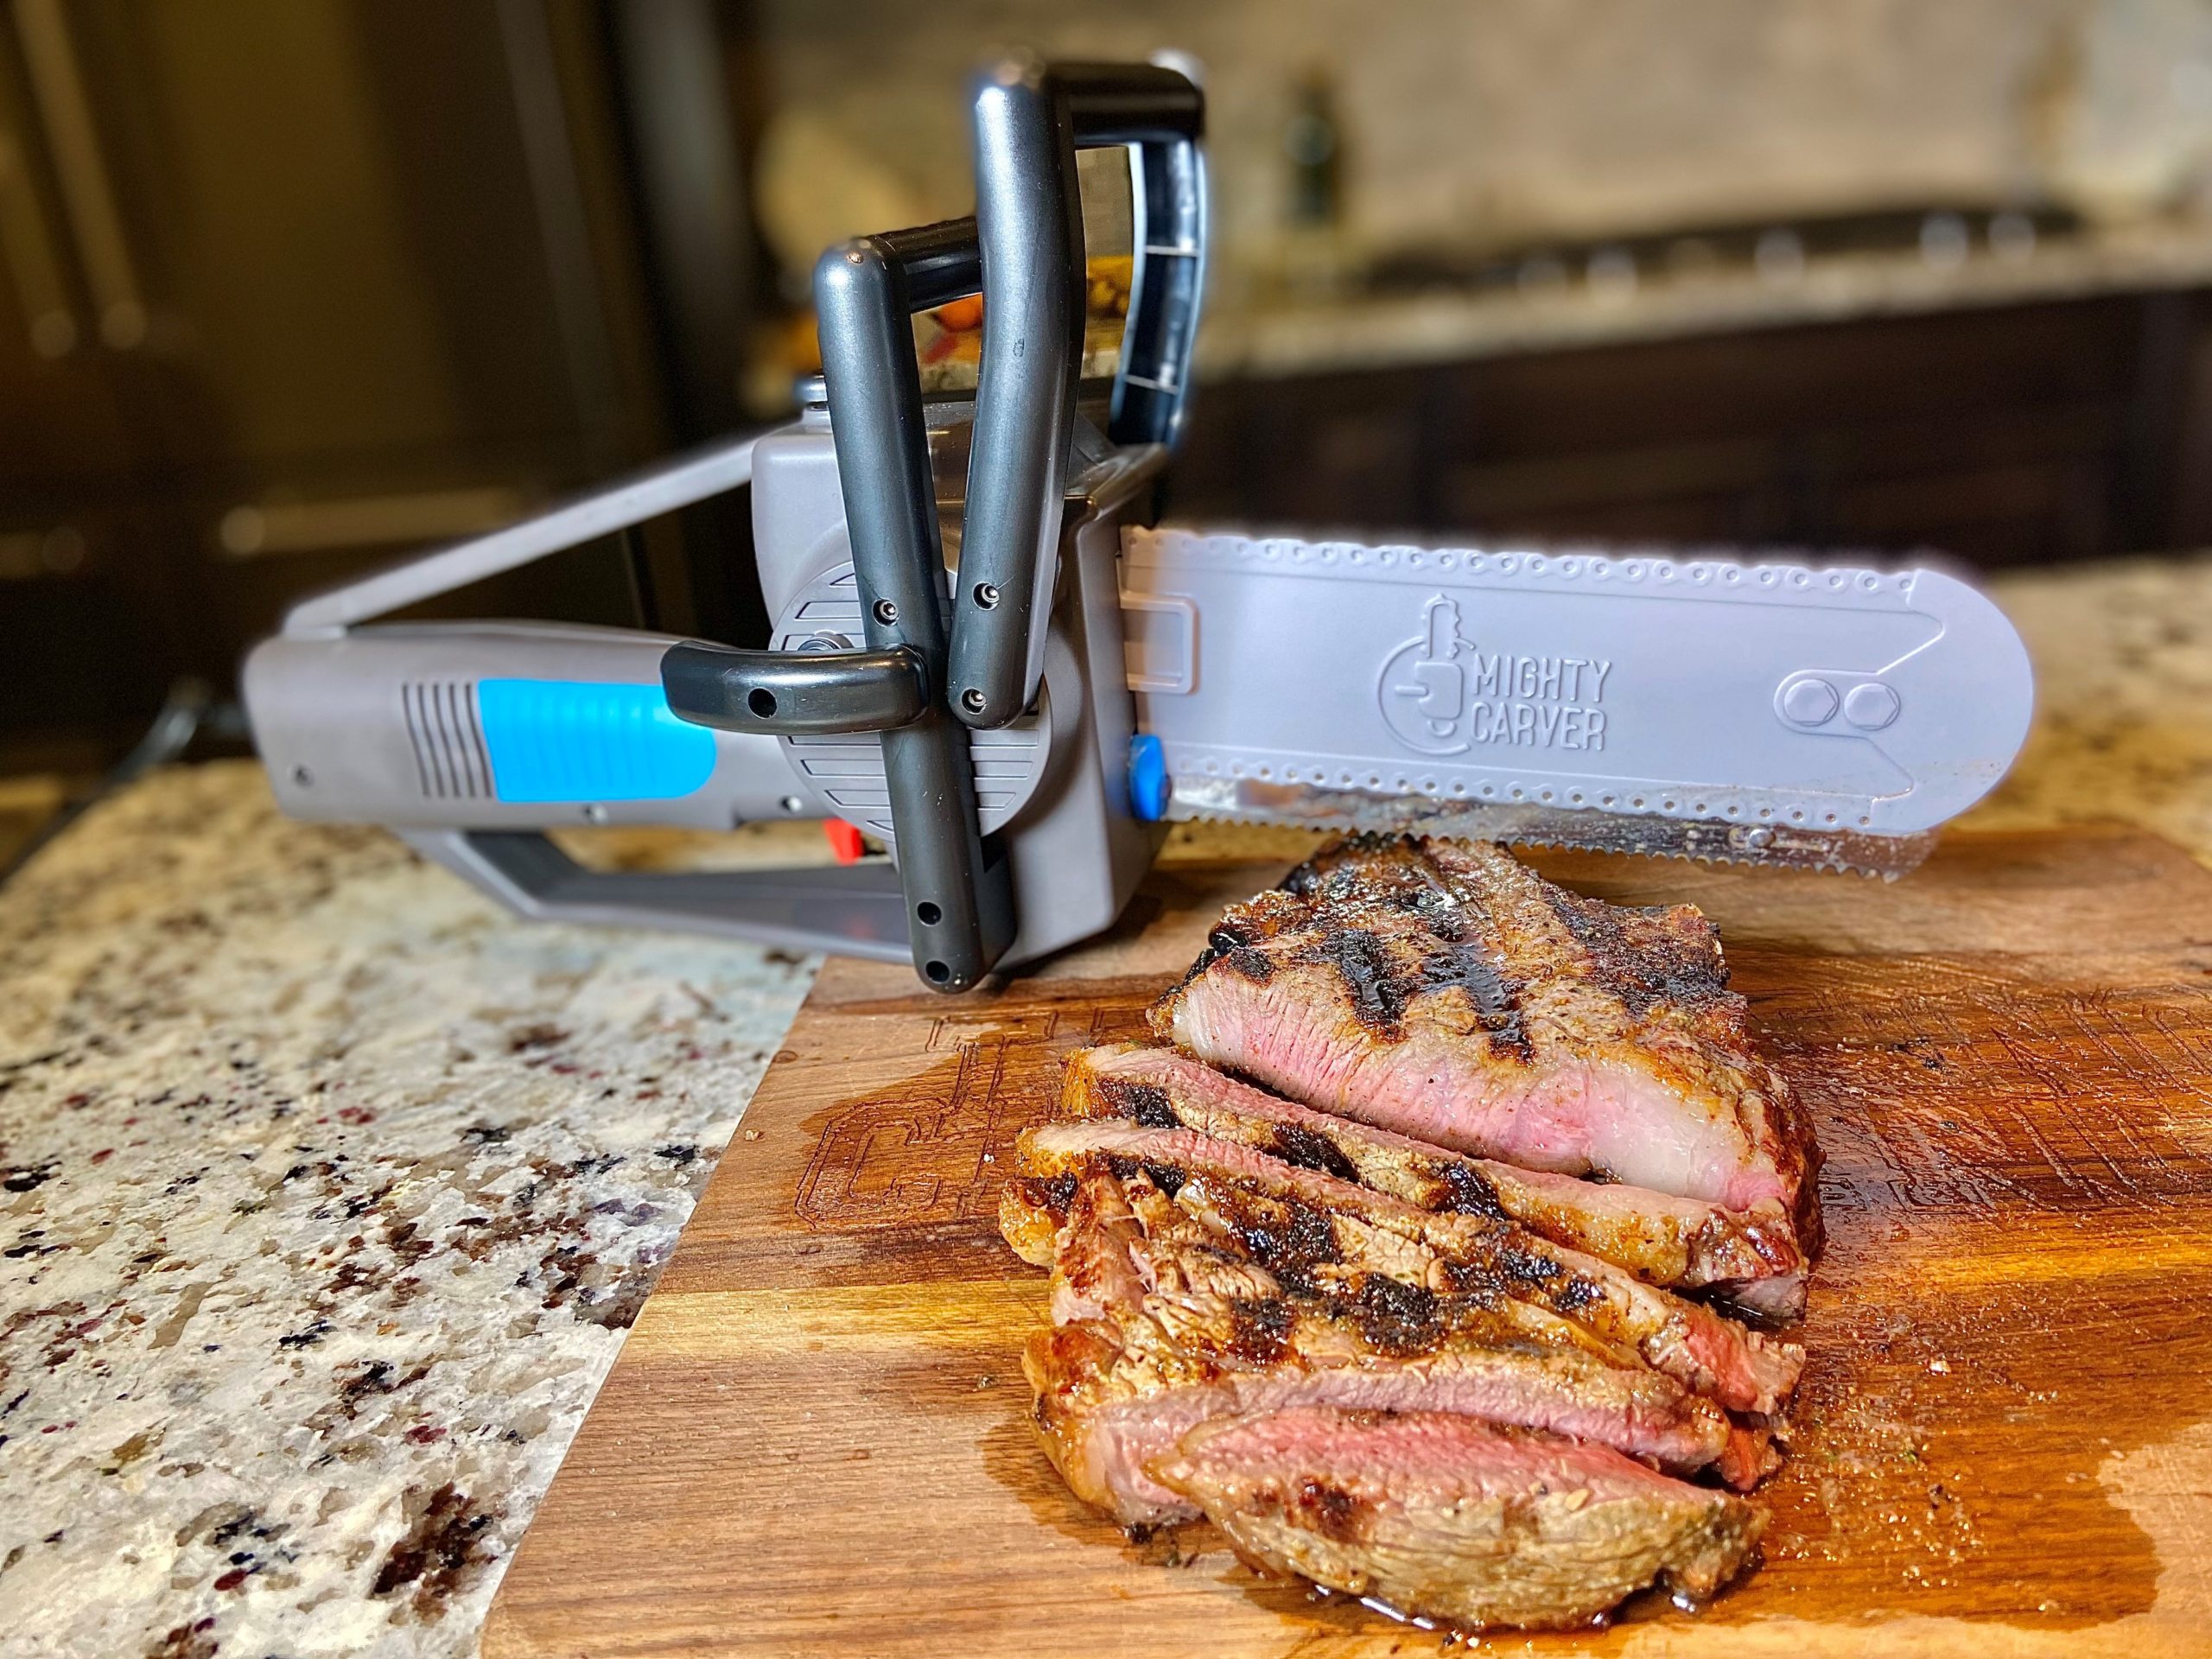  MIGHTY CARVER Electric Carving Knife, As Seen On Shark